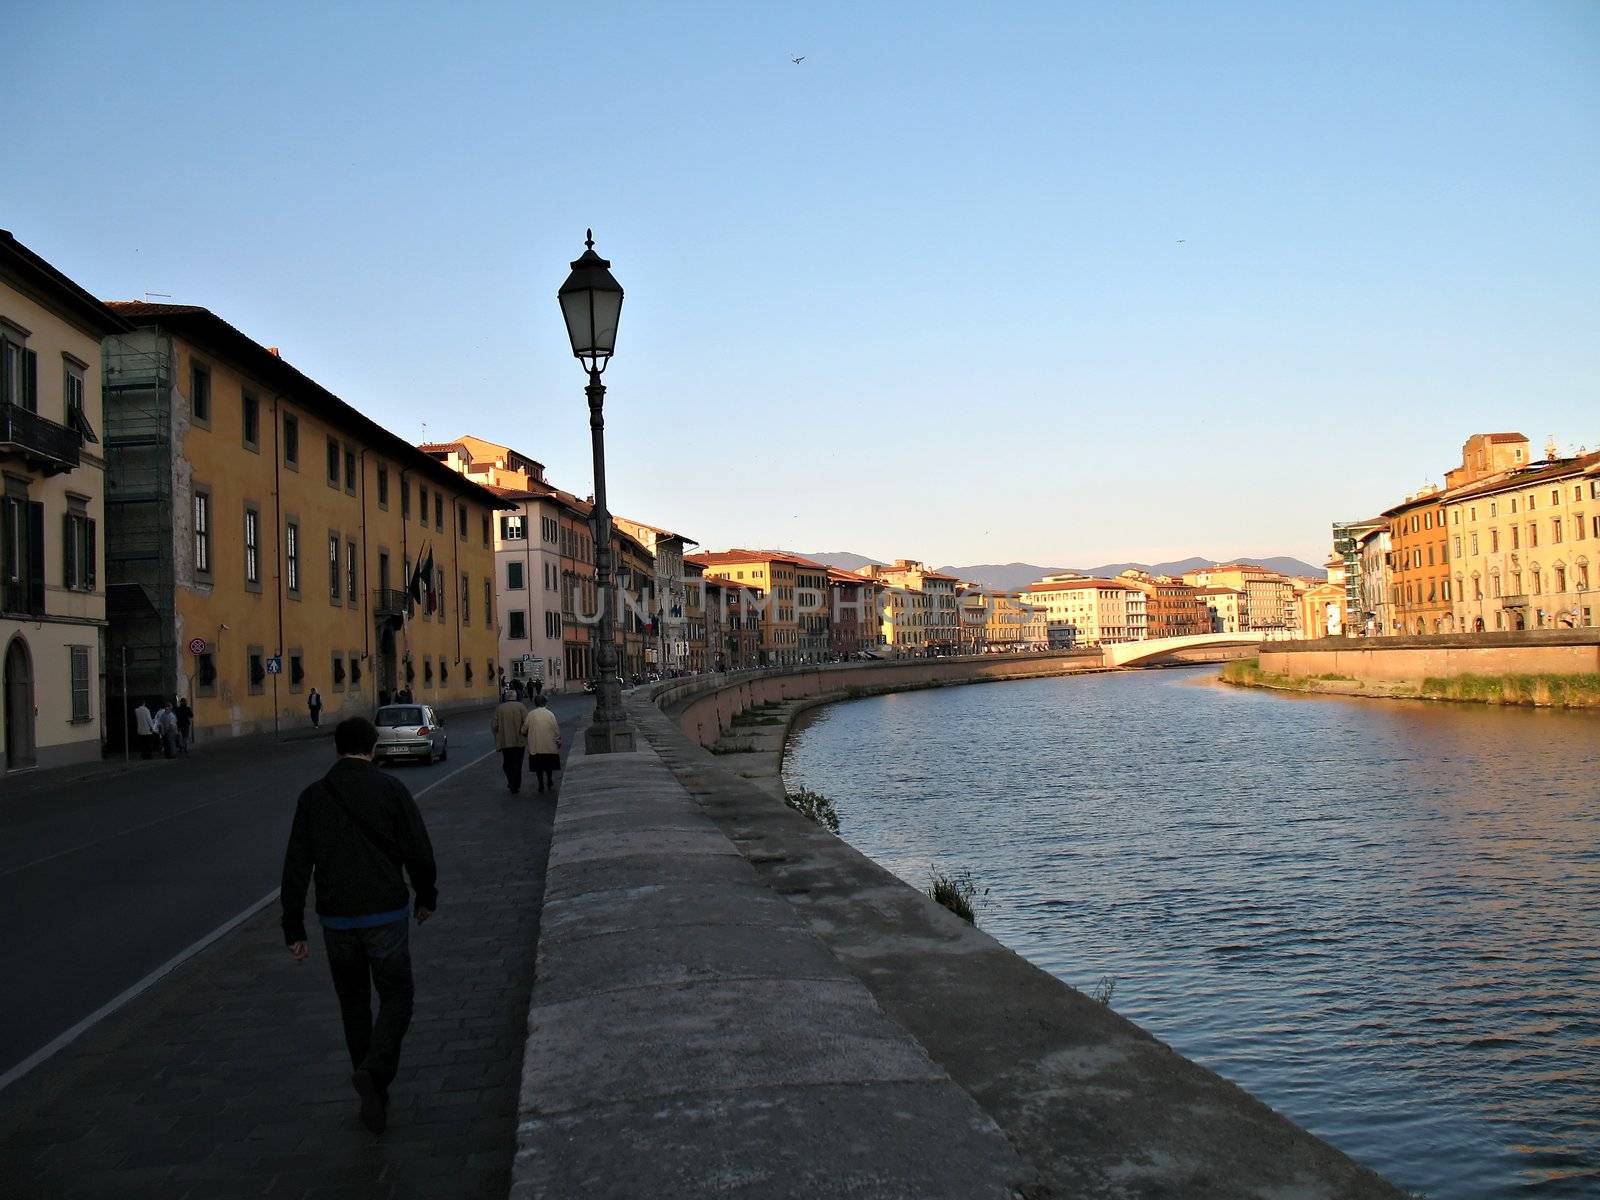 A view of the Arno River, buildings, bridge. Pisa, Italy